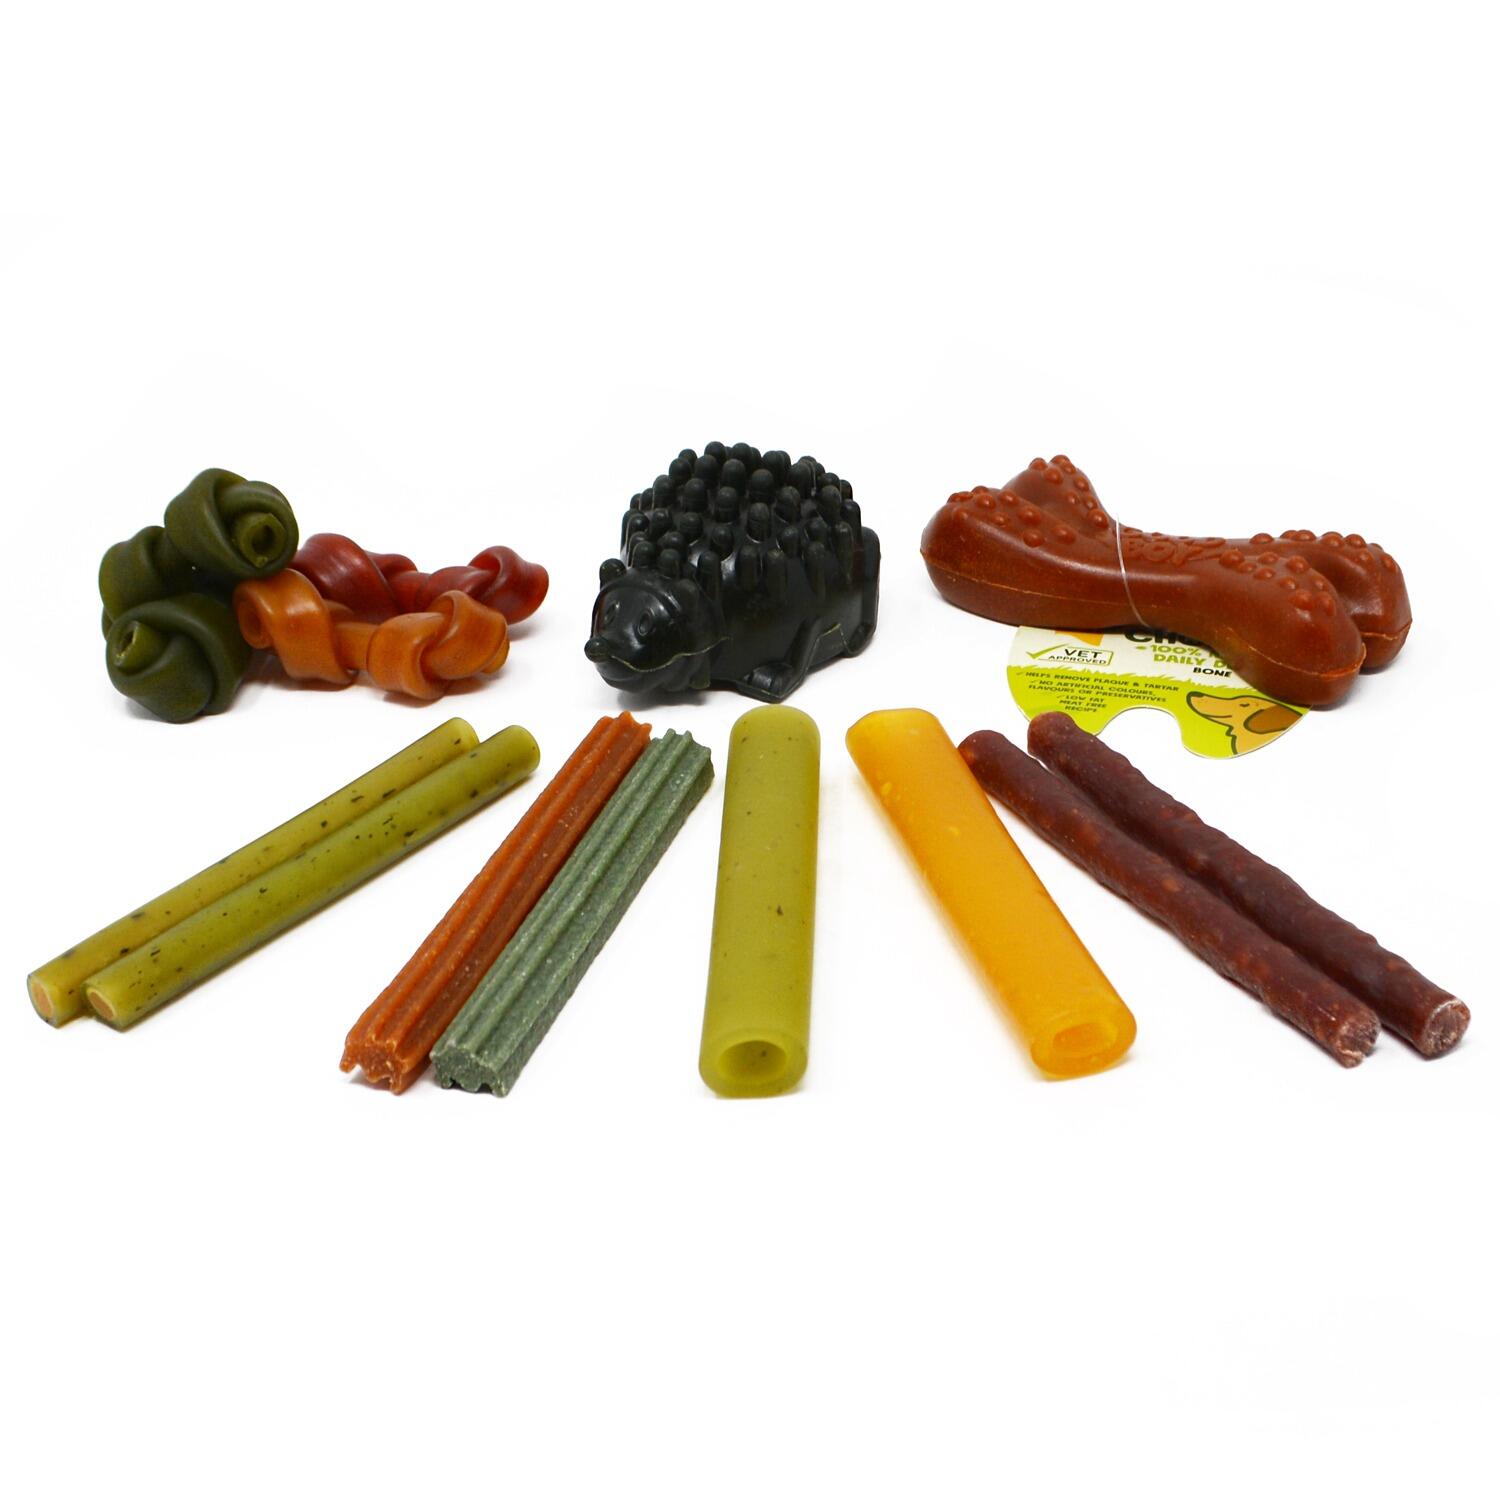 A selection of plant based dog chews for small dogs